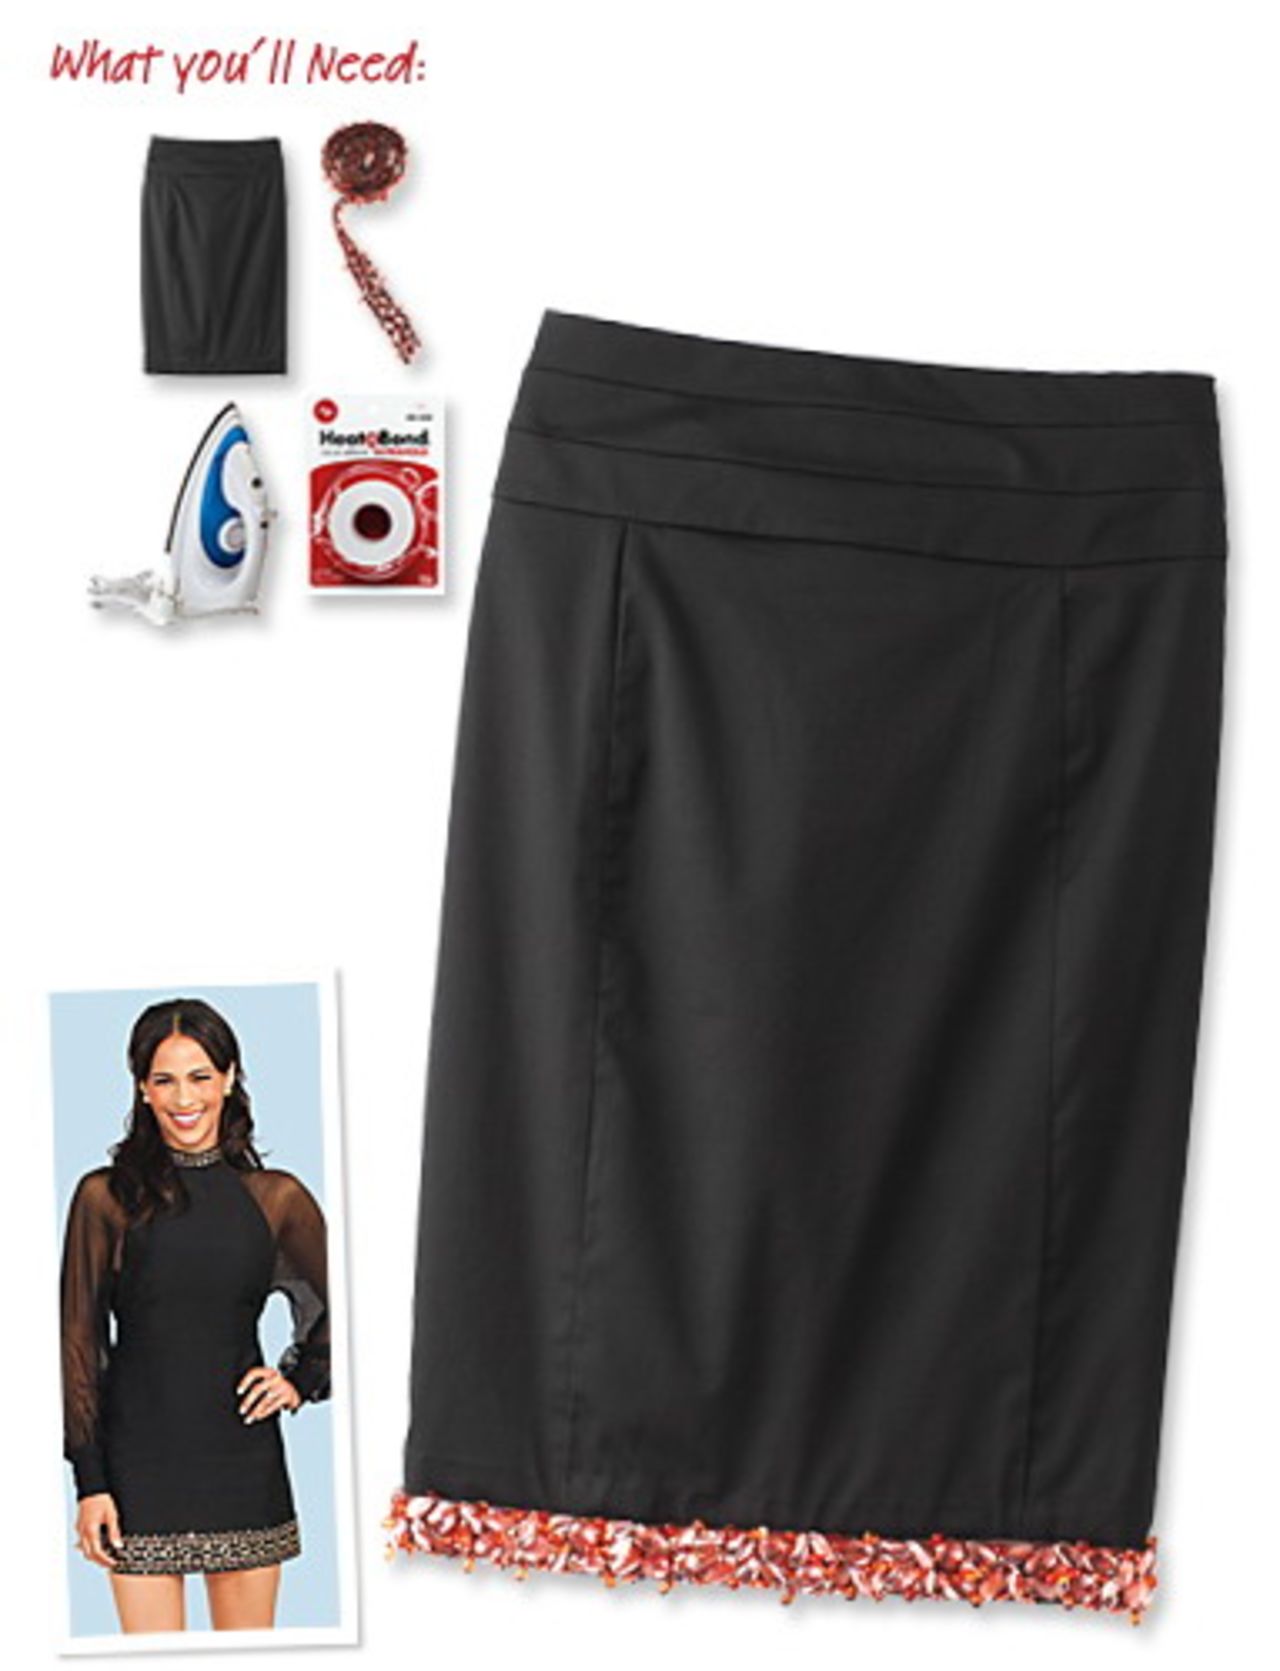 Jewel-lined pencil skirt, inspired by Paula Patton.